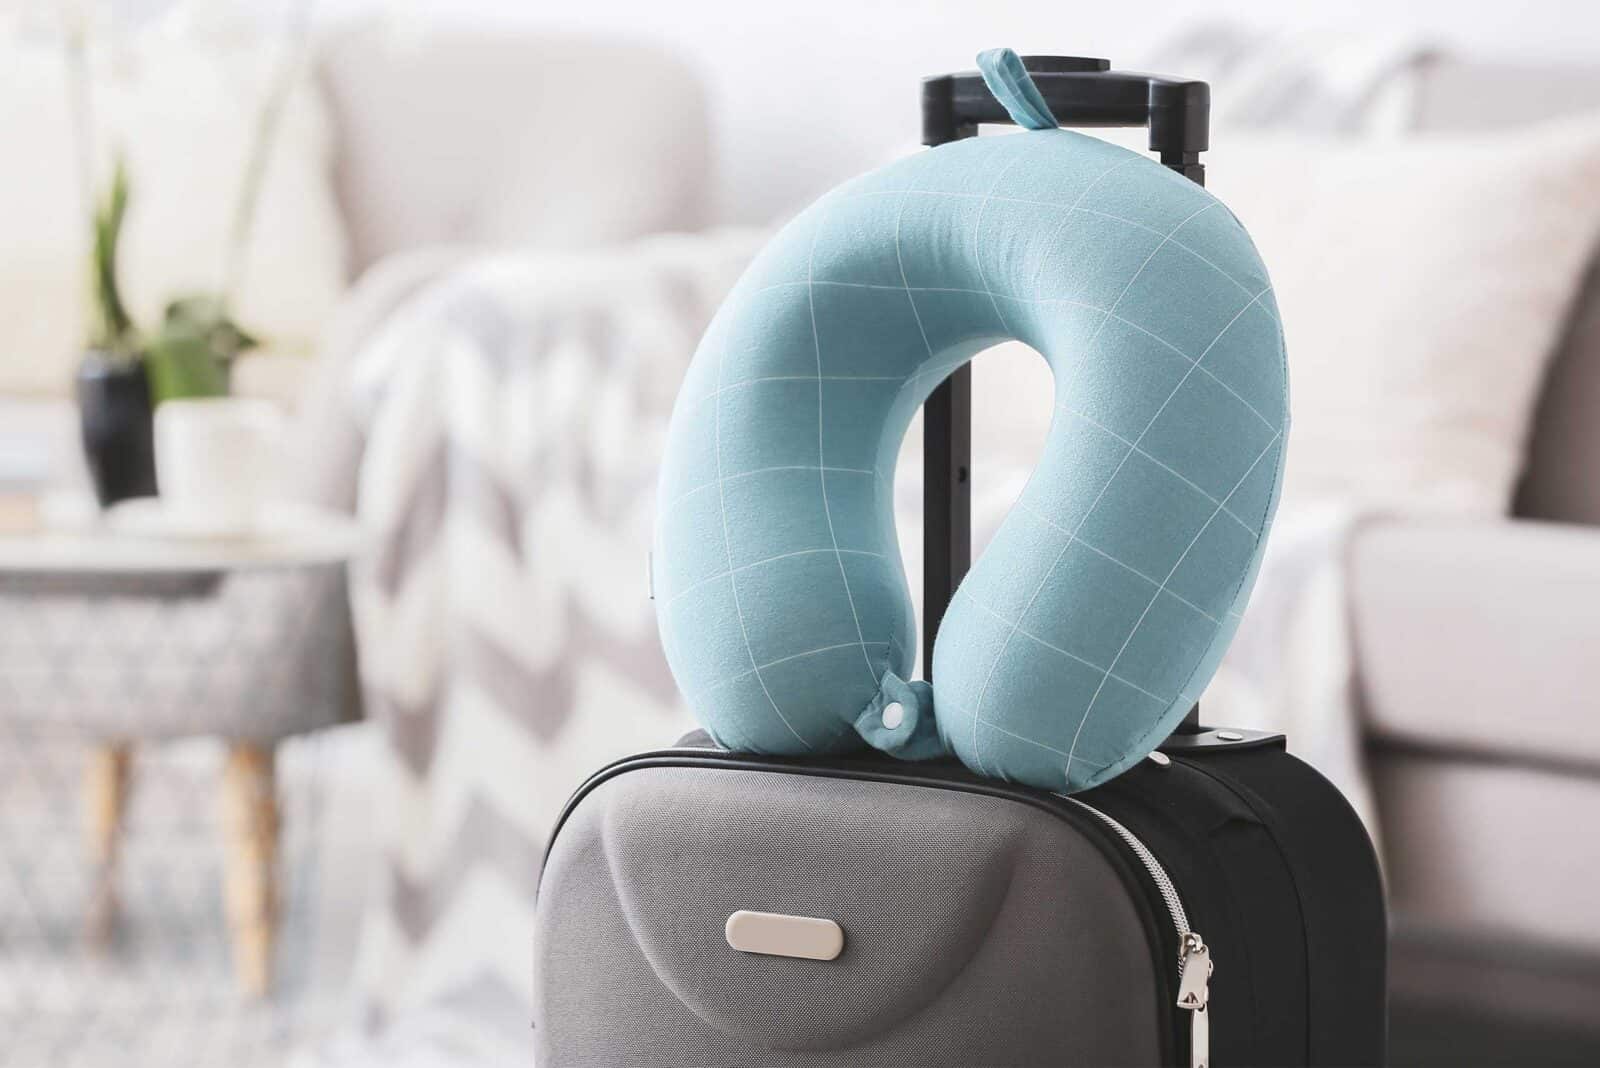 12 Amazing Inflatable Airplane Seat Cushion for 2023